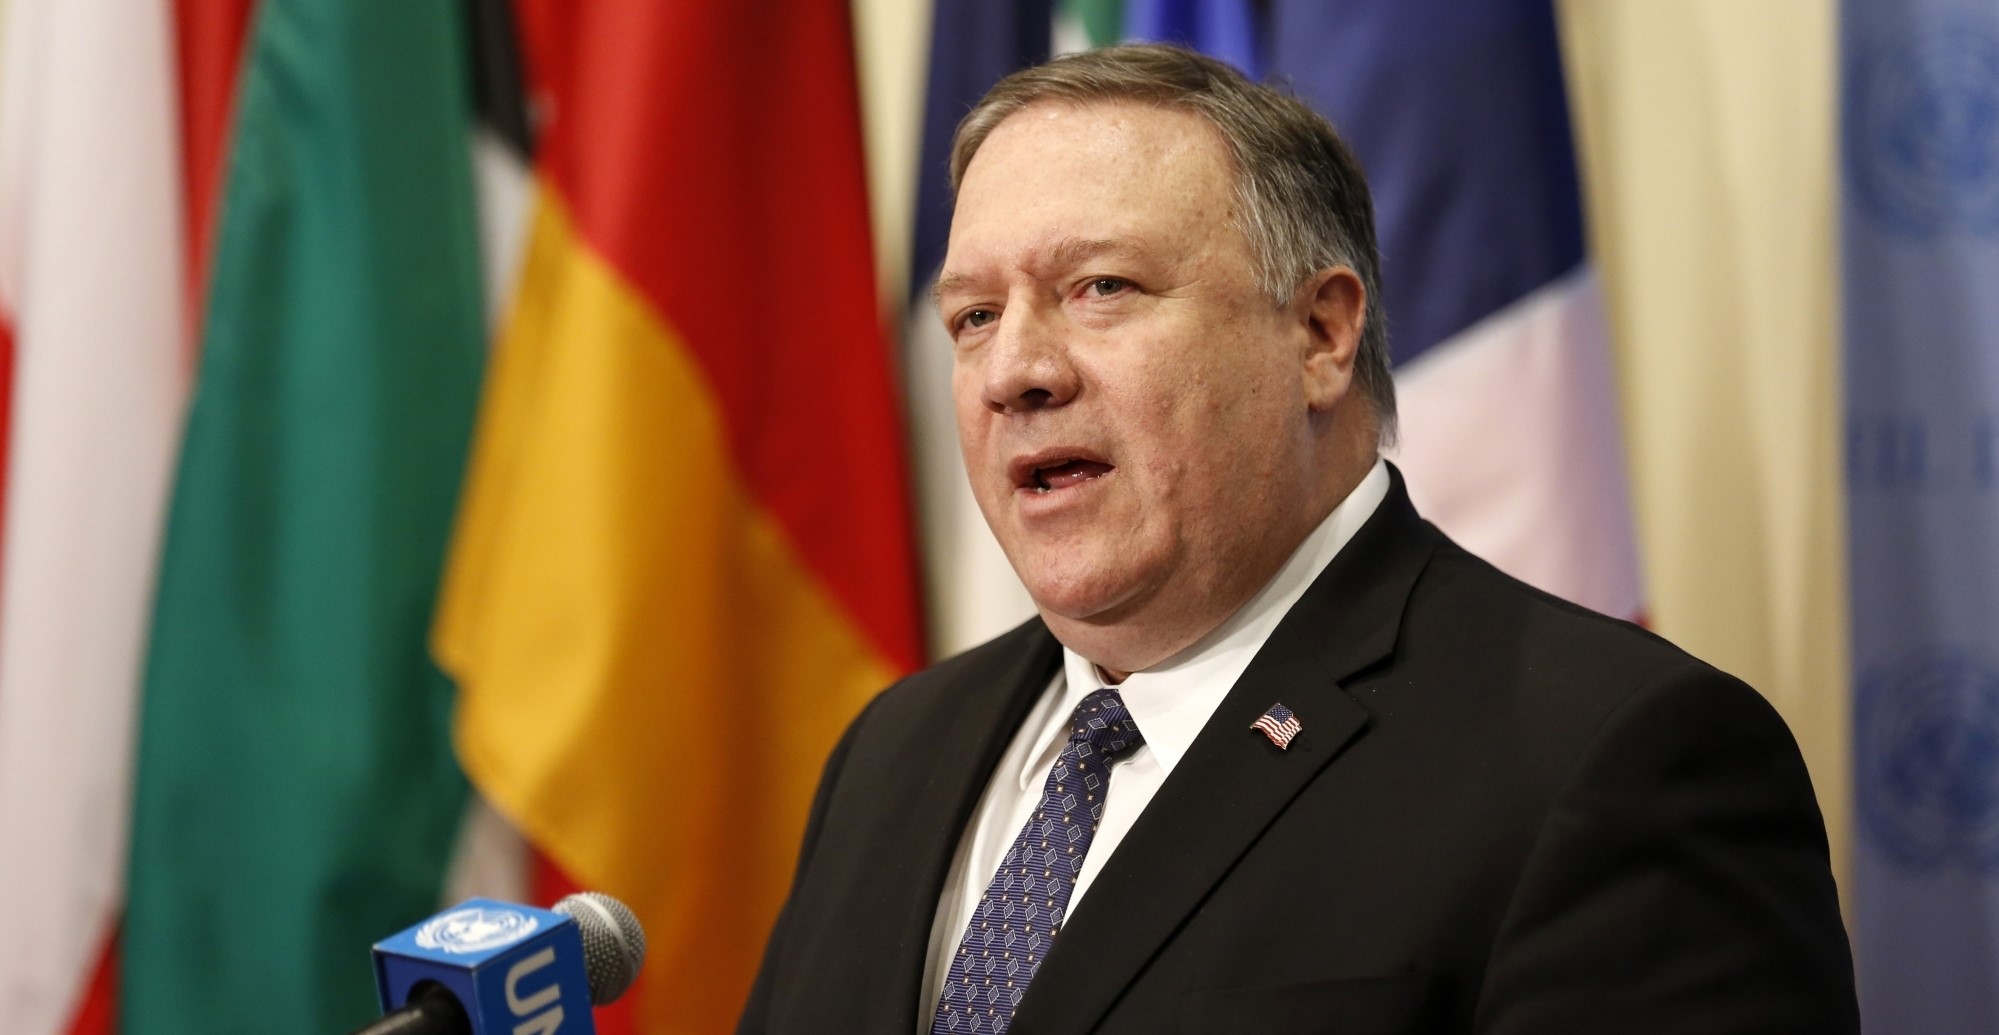 Pompeo defends stand of Trump administration on trade tensions with China